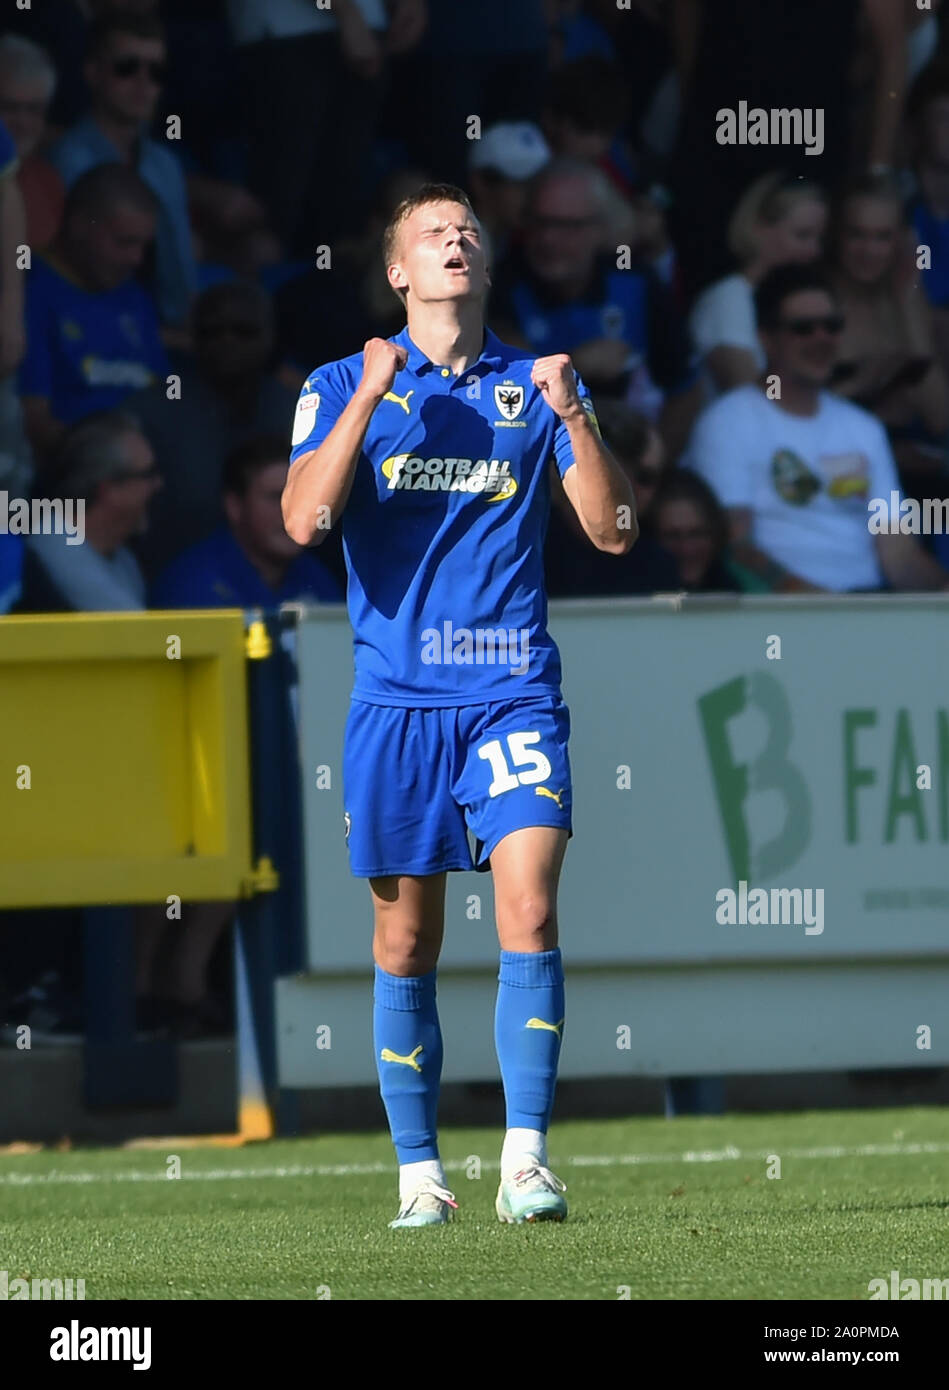 London UK 21 September 2019 - Marcus Forss of AFC Wimbledon celebrates after scoring their first goal during the Sky Bet League One football match between AFC Wimbledon and Bristol Rovers at the Cherry Red Records Stadium - Editorial use only. No merchandising. For Football images FA and Premier League restrictions apply inc. no internet/mobile usage without FAPL license - for details contact Football Dataco . credit  : Simon Dack TPI / Alamy Live News Stock Photo